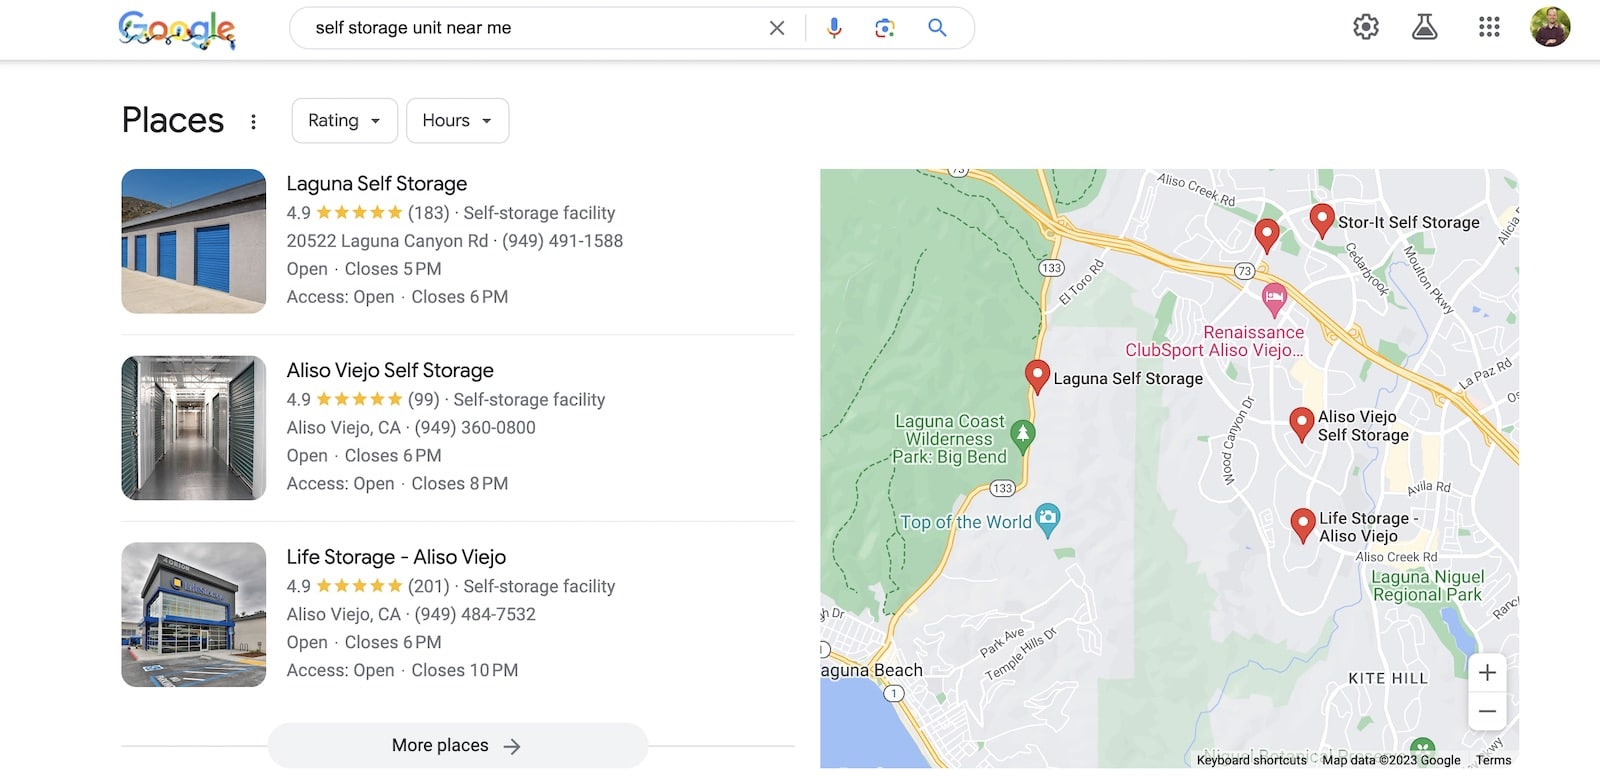 A screenshot of google search results for someone looking for self storage near me.